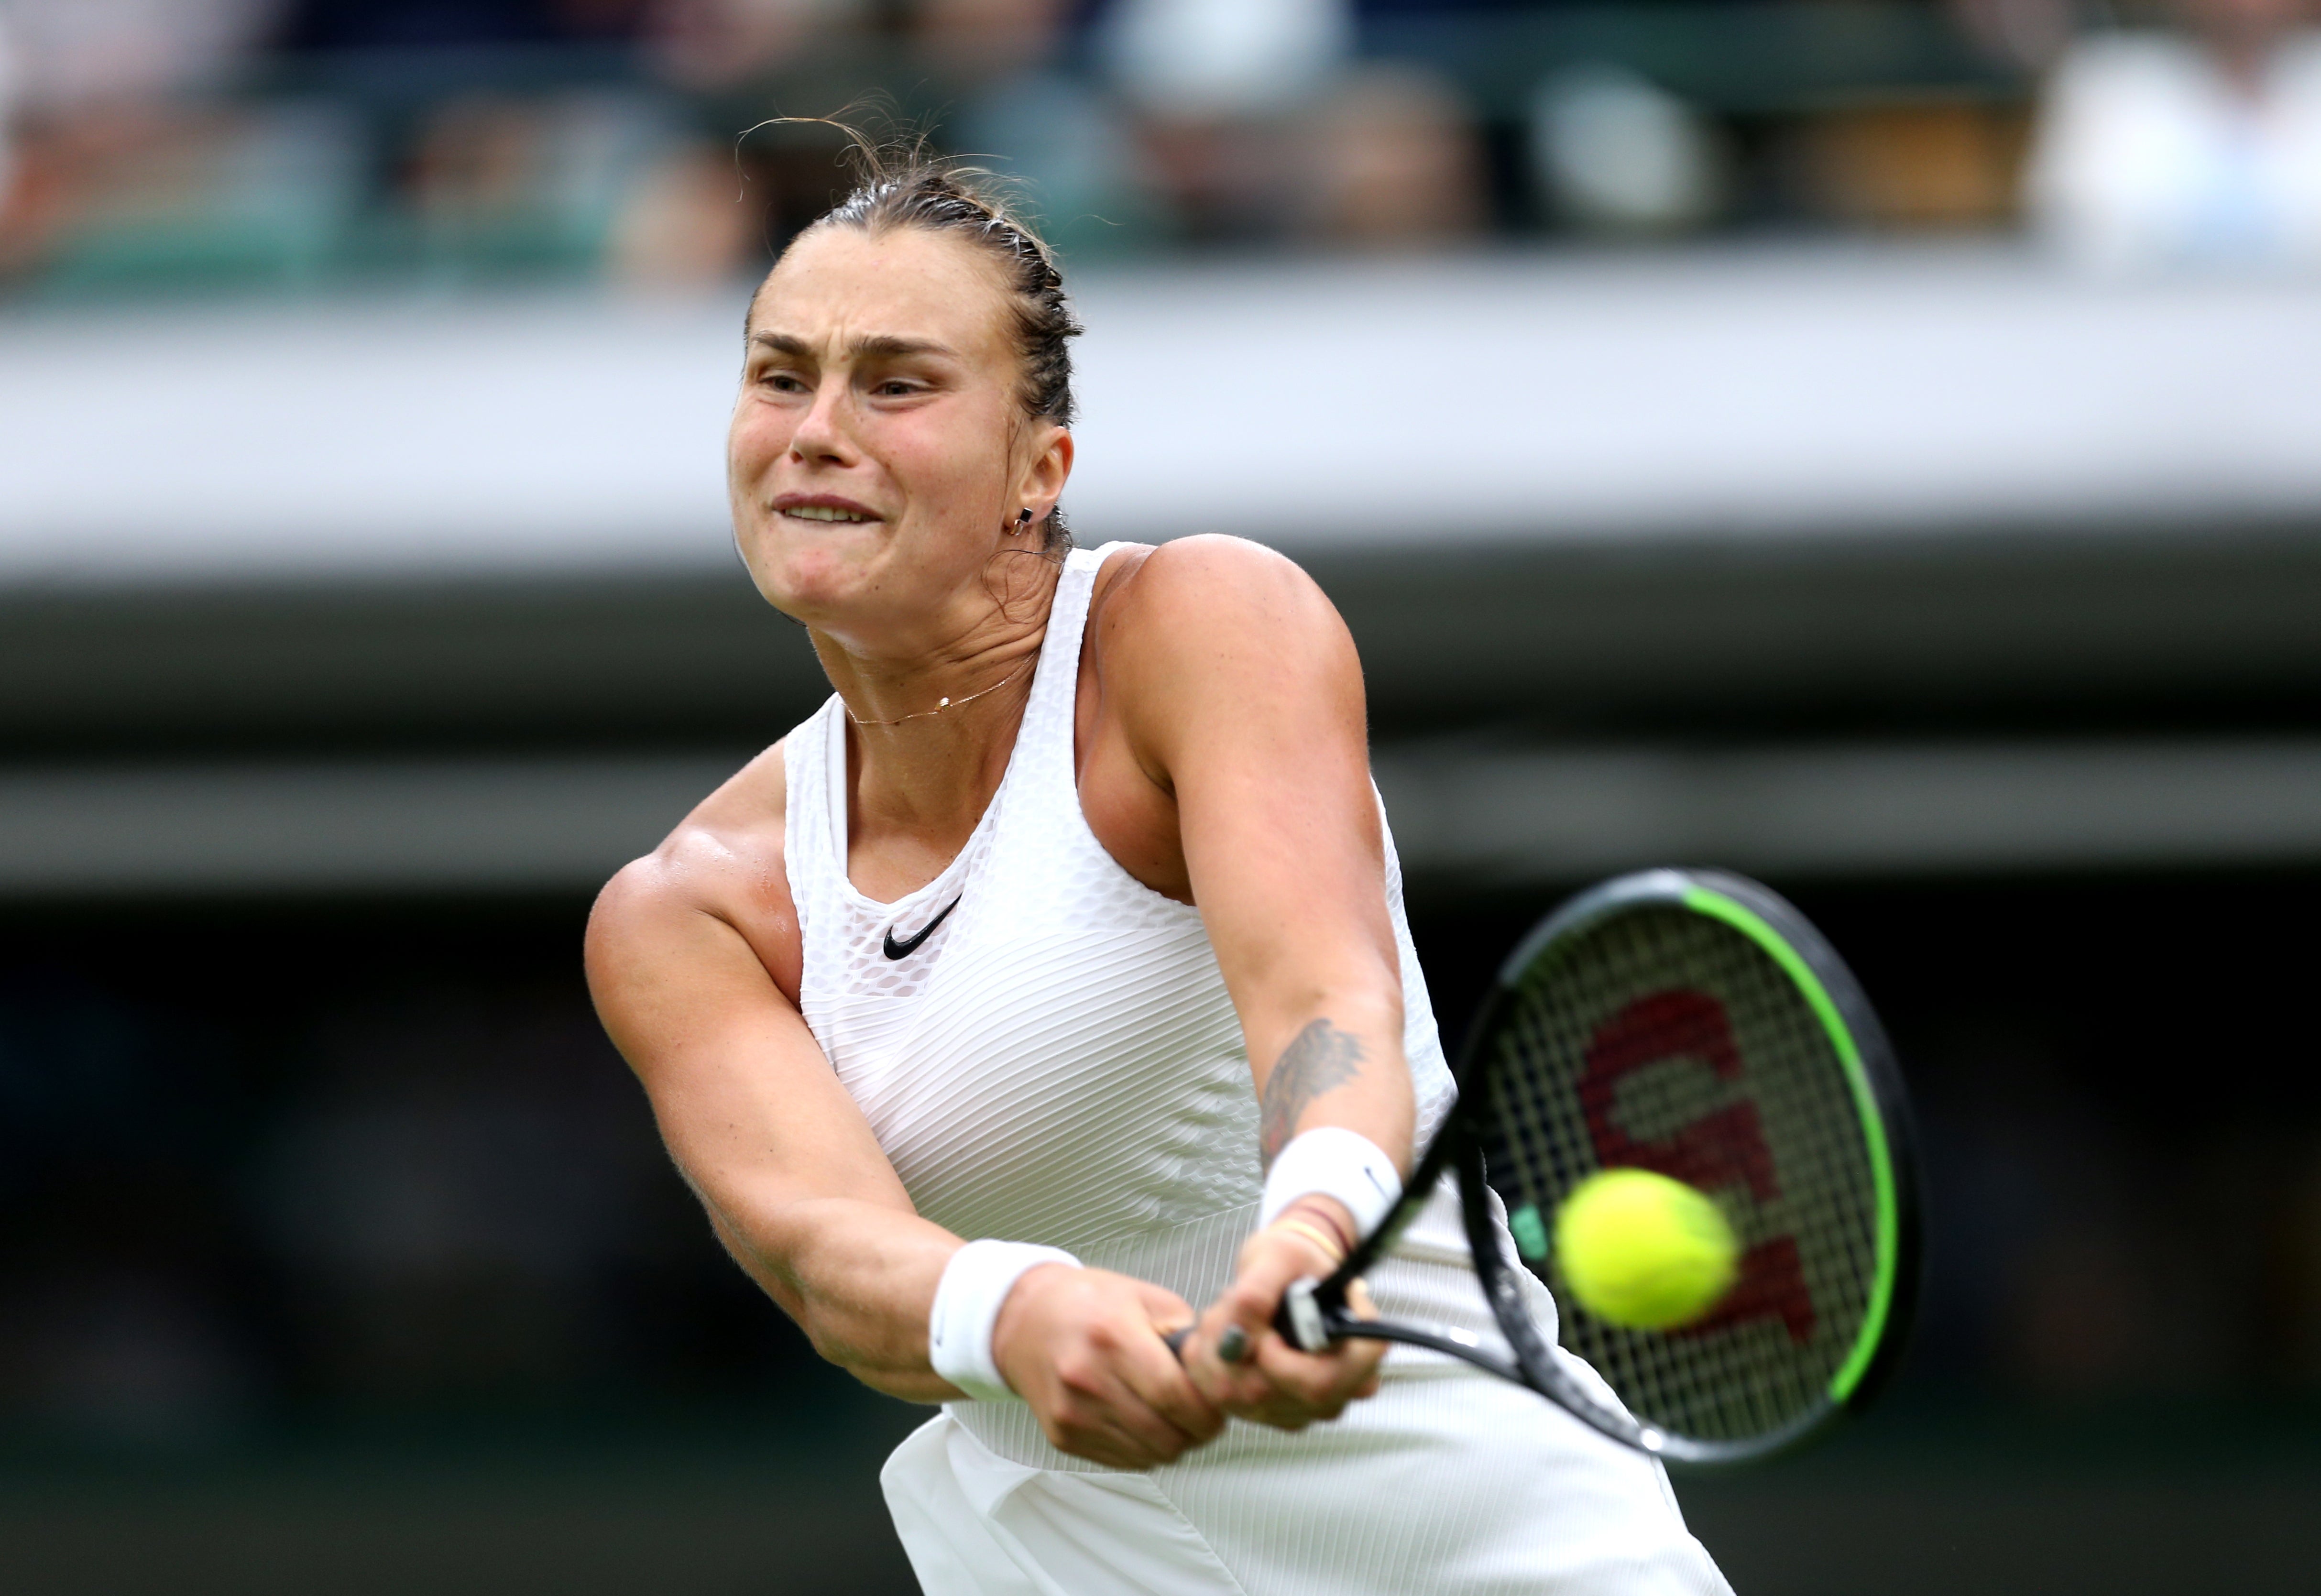 Second seed Aryna Sabalenka battles opening-day nerves to book spot in round two The Independent